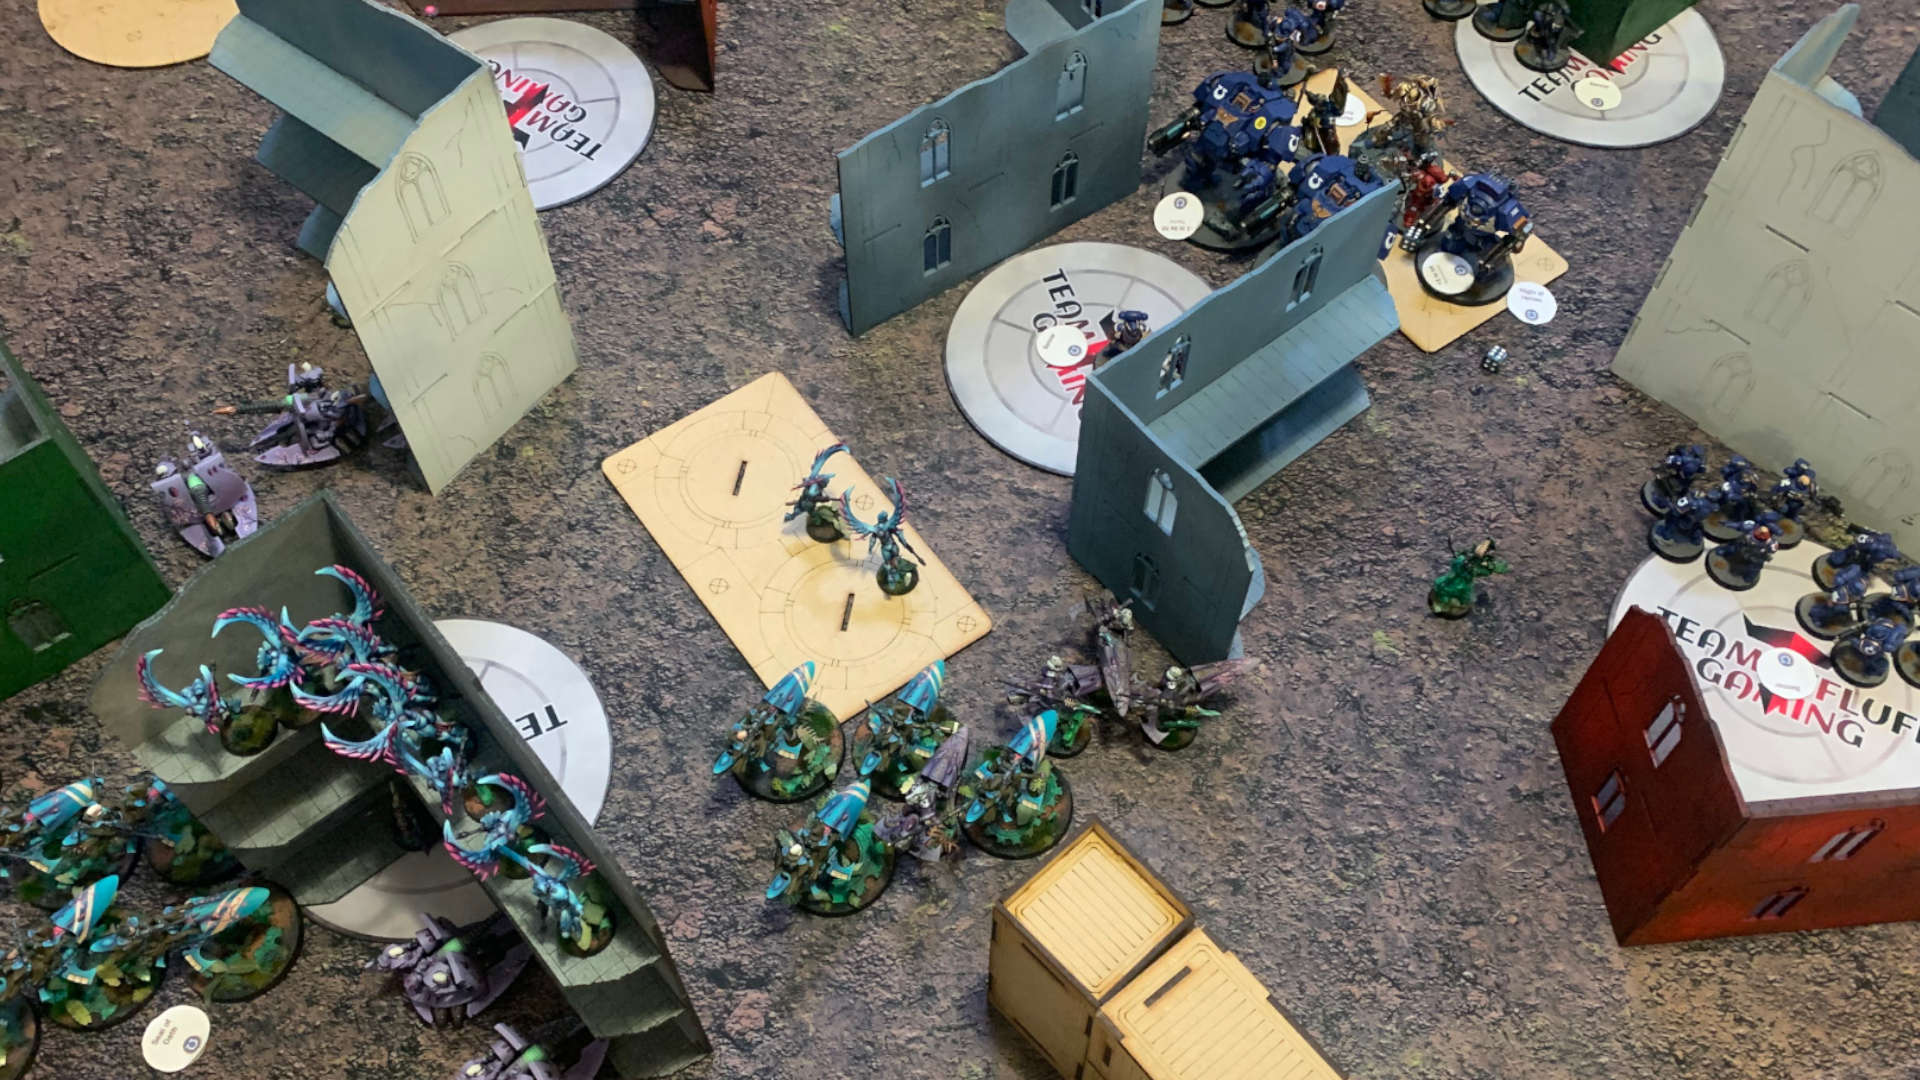 Warhammer 40k tournament organiser explains problems in 10th edition for competitive play - a tournament game in progress, forces jockey for position around ruins